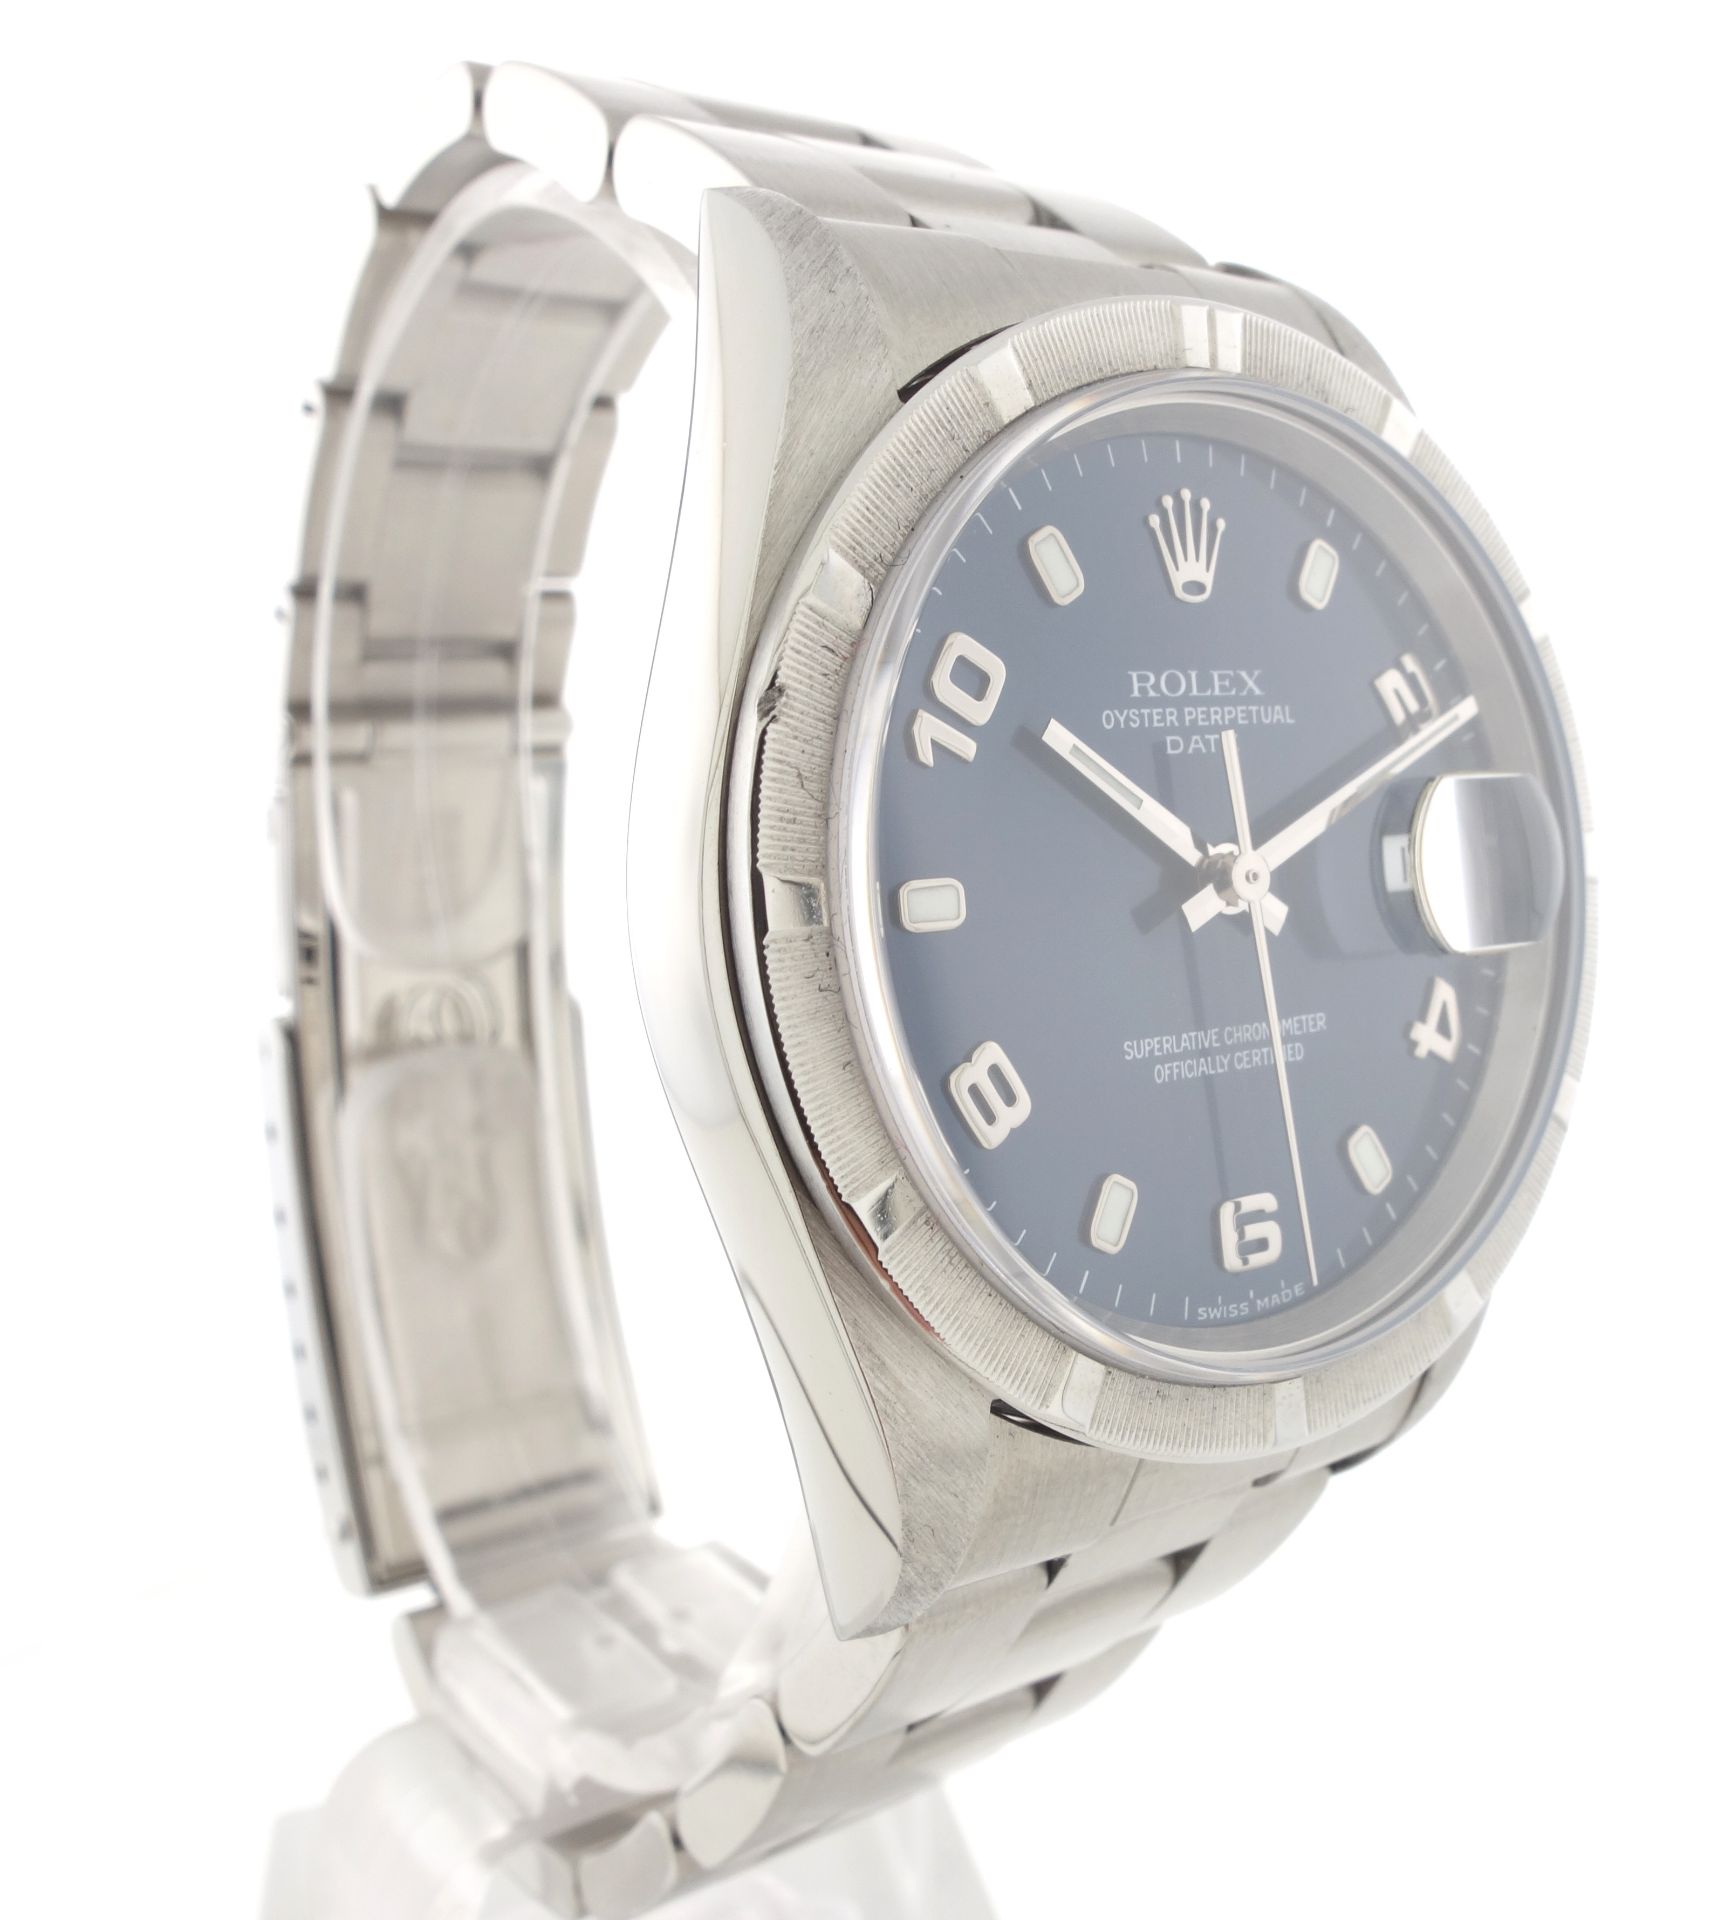 Rolex Oyster Perpetual Date 15210 - Image 3 of 4